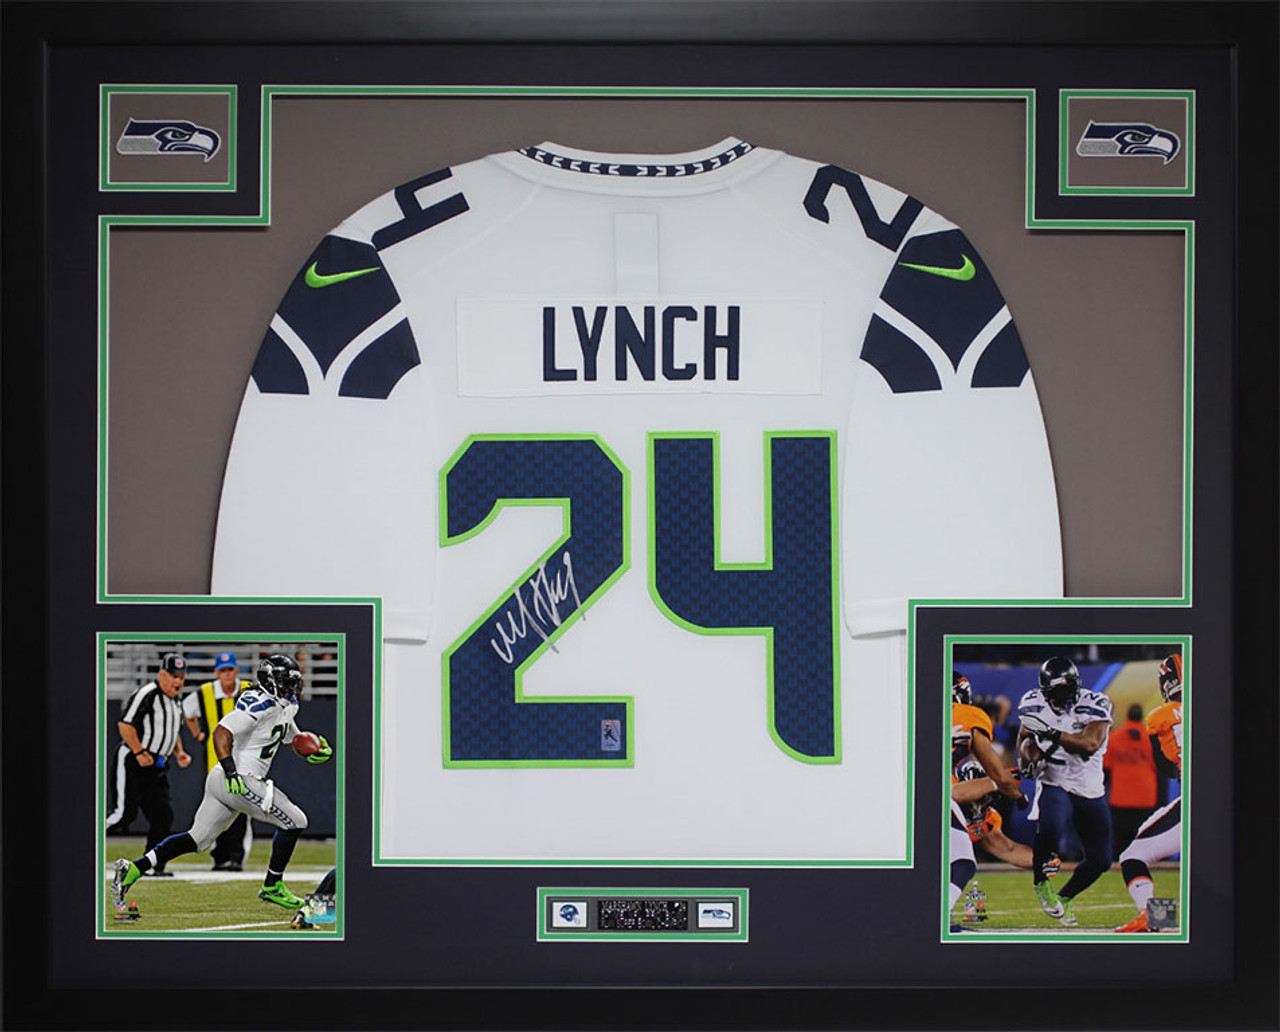 James Worthy Autographed and Framed Seattle Seahawks Jersey